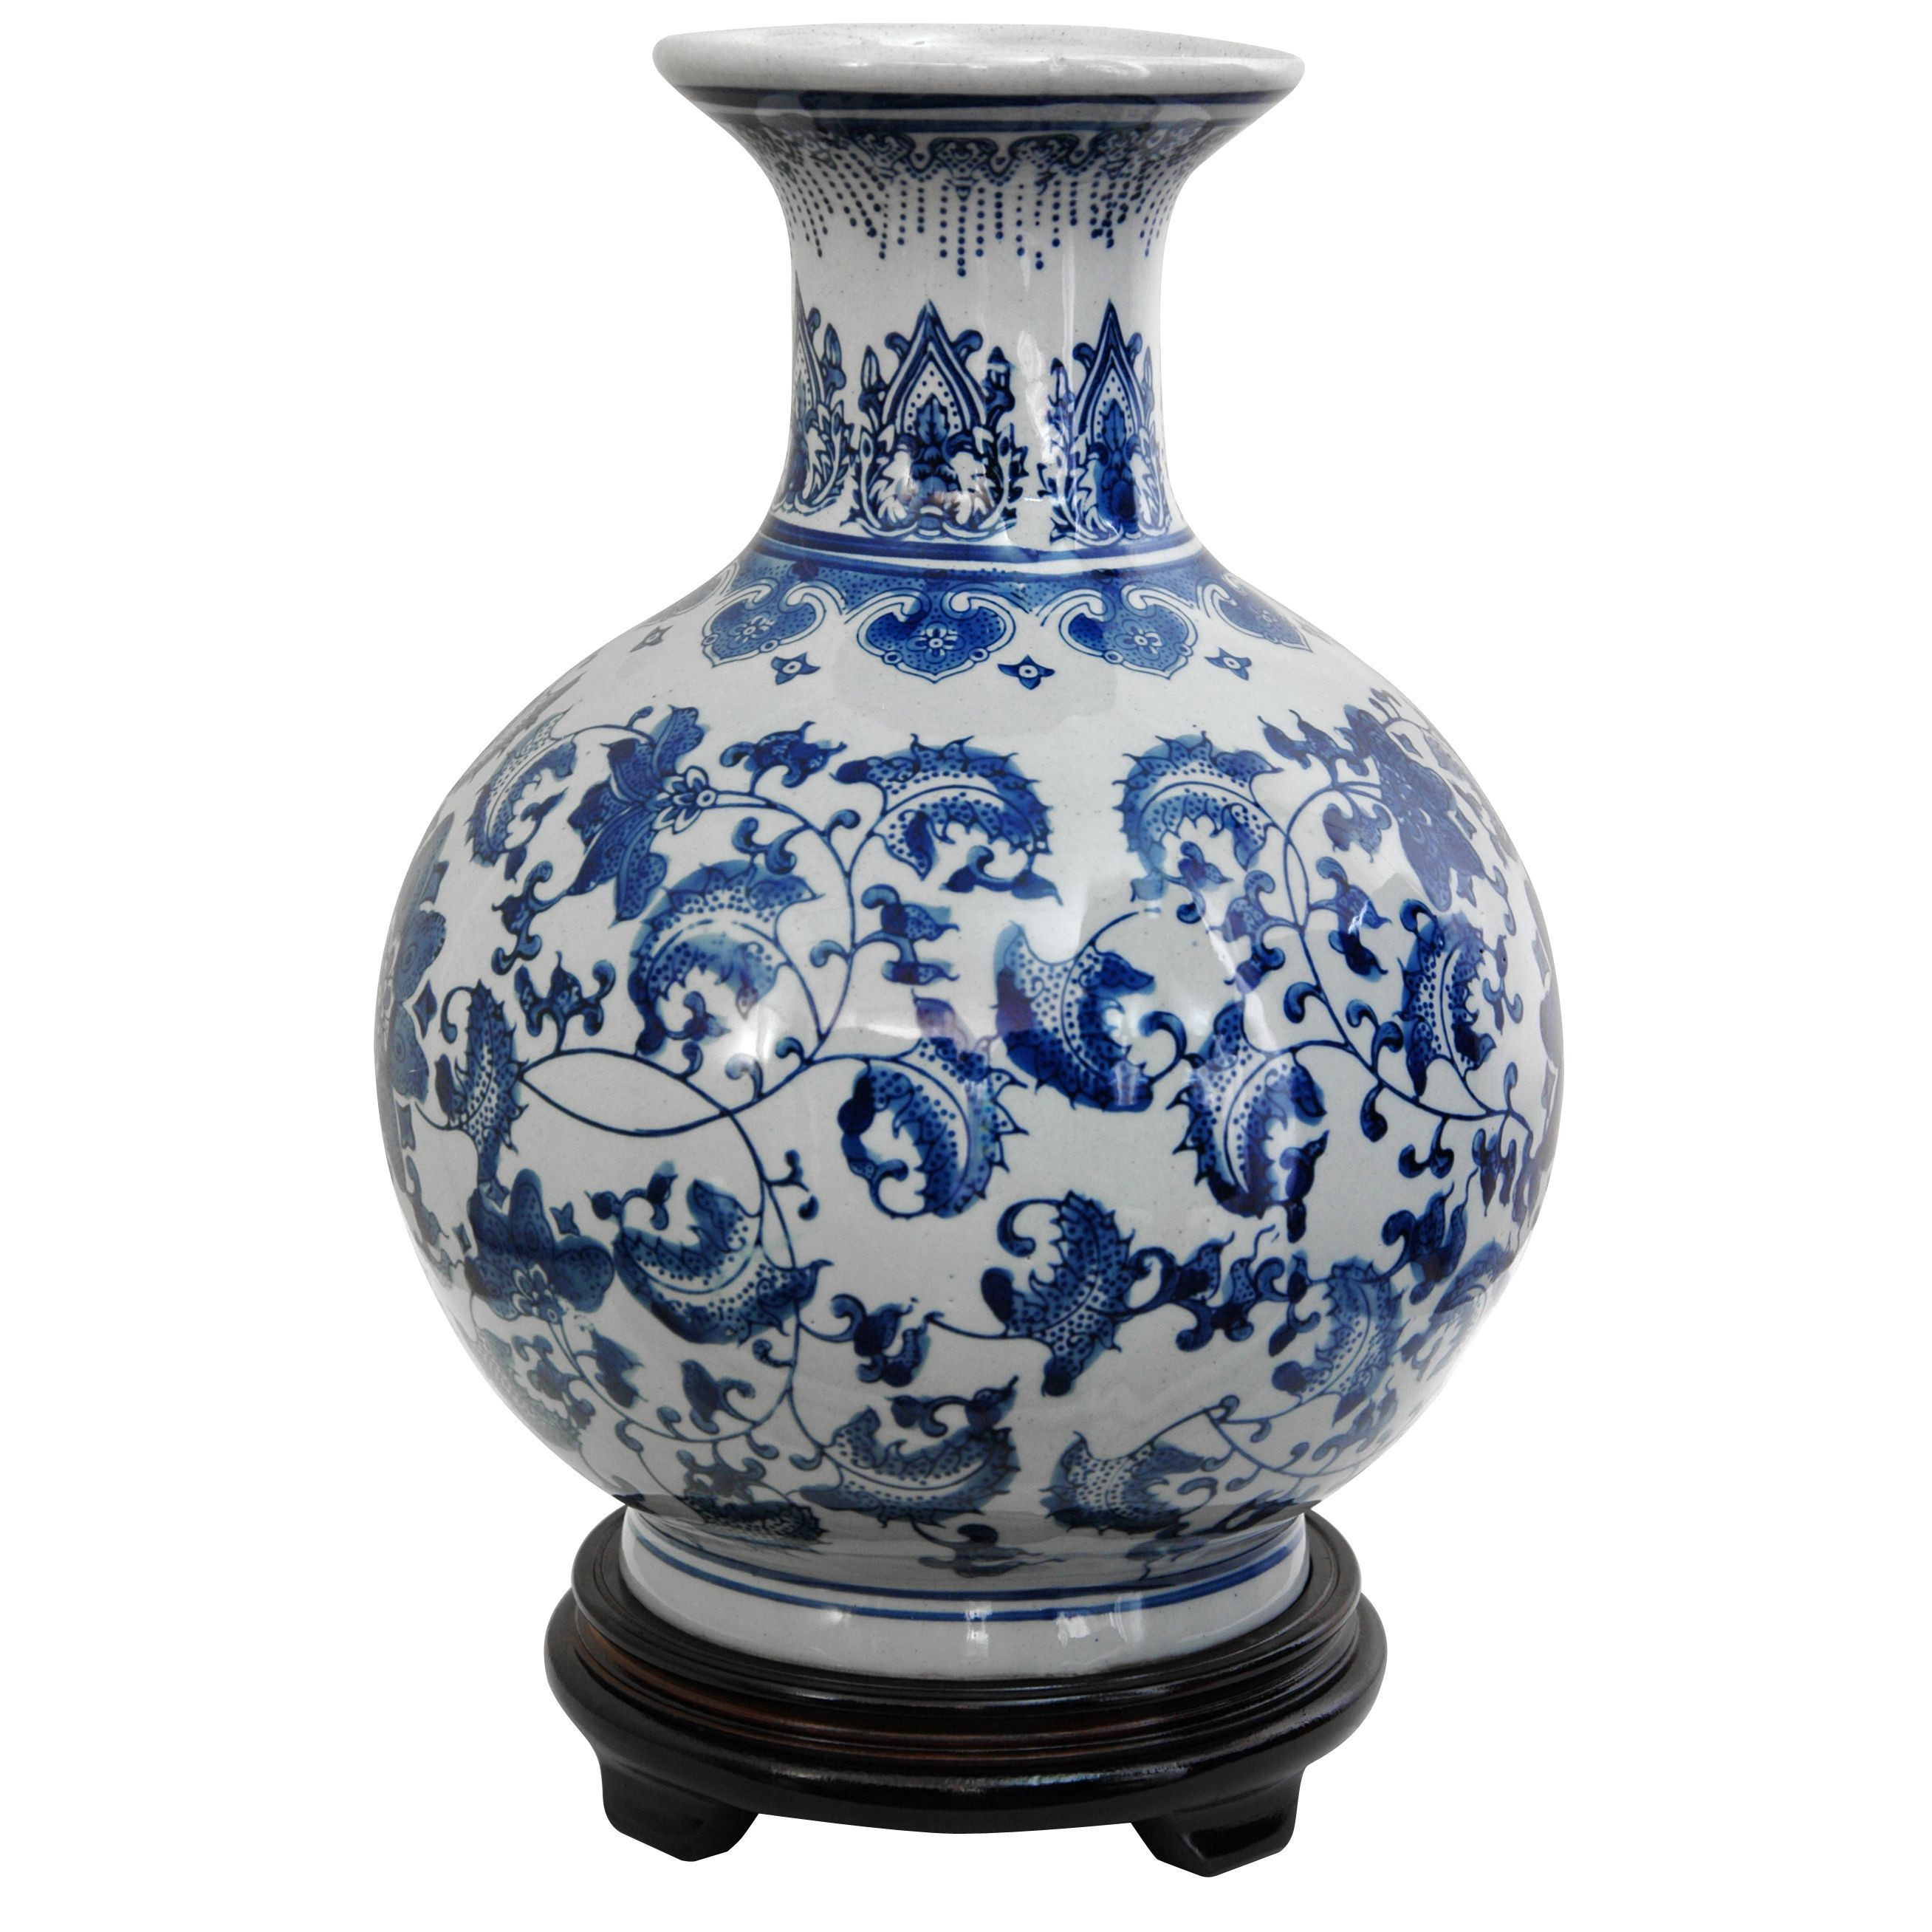 15 Recommended oriental Accent Vase 2024 free download oriental accent vase of this handmade chinese blue and white vase is the perfect elegant throughout this handmade chinese blue and white vase is the perfect elegant accent for any room this 